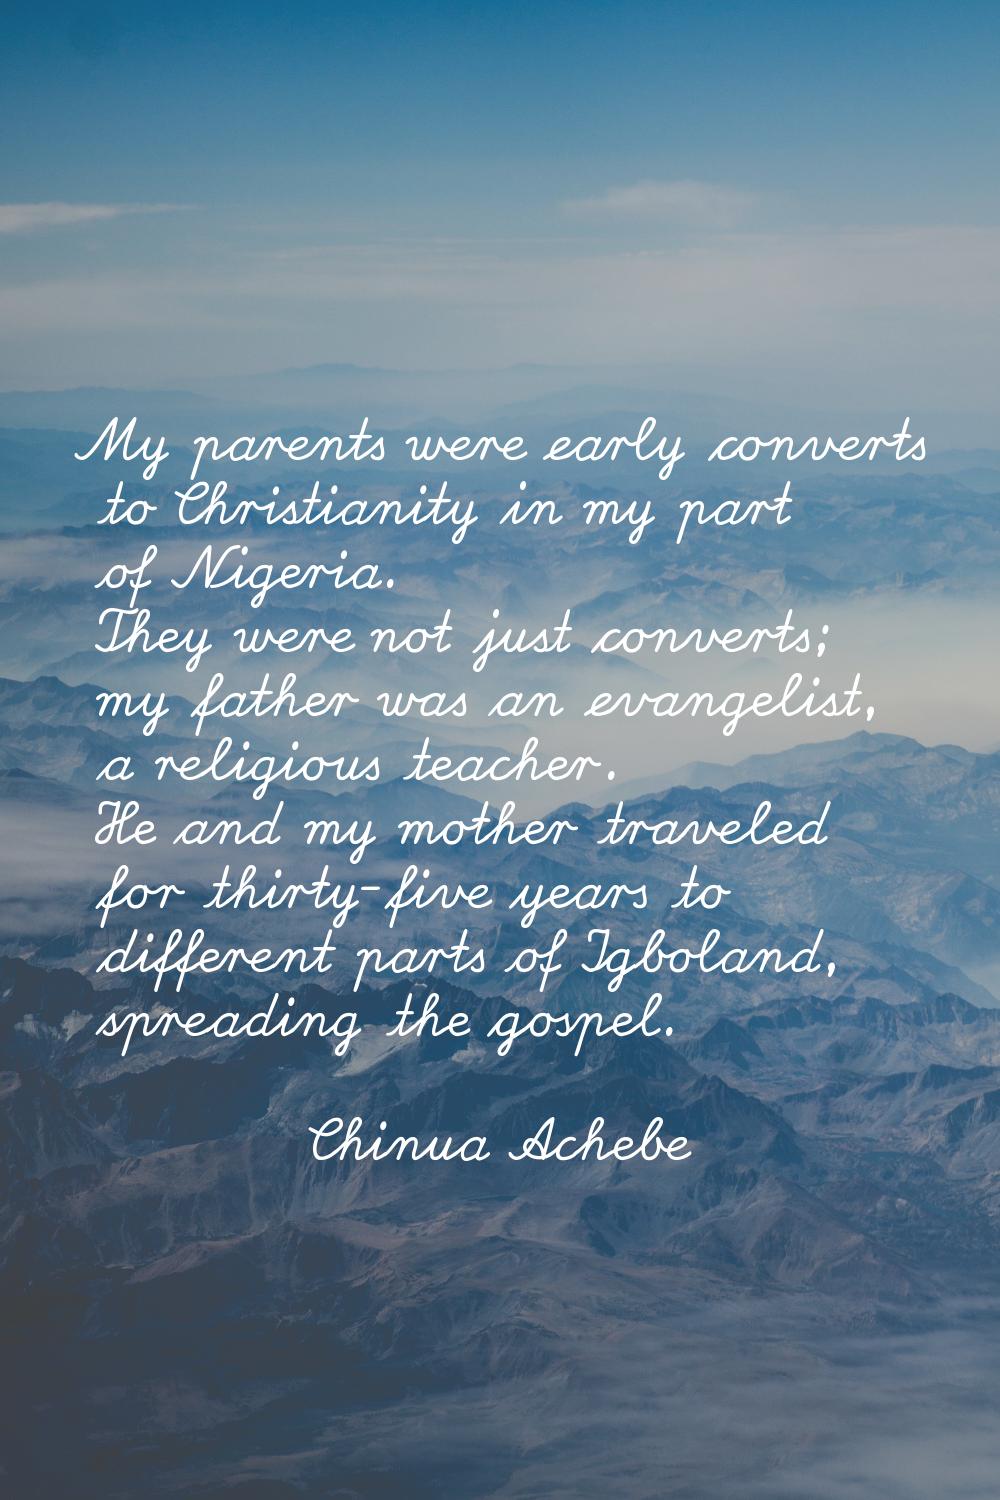 My parents were early converts to Christianity in my part of Nigeria. They were not just converts; 